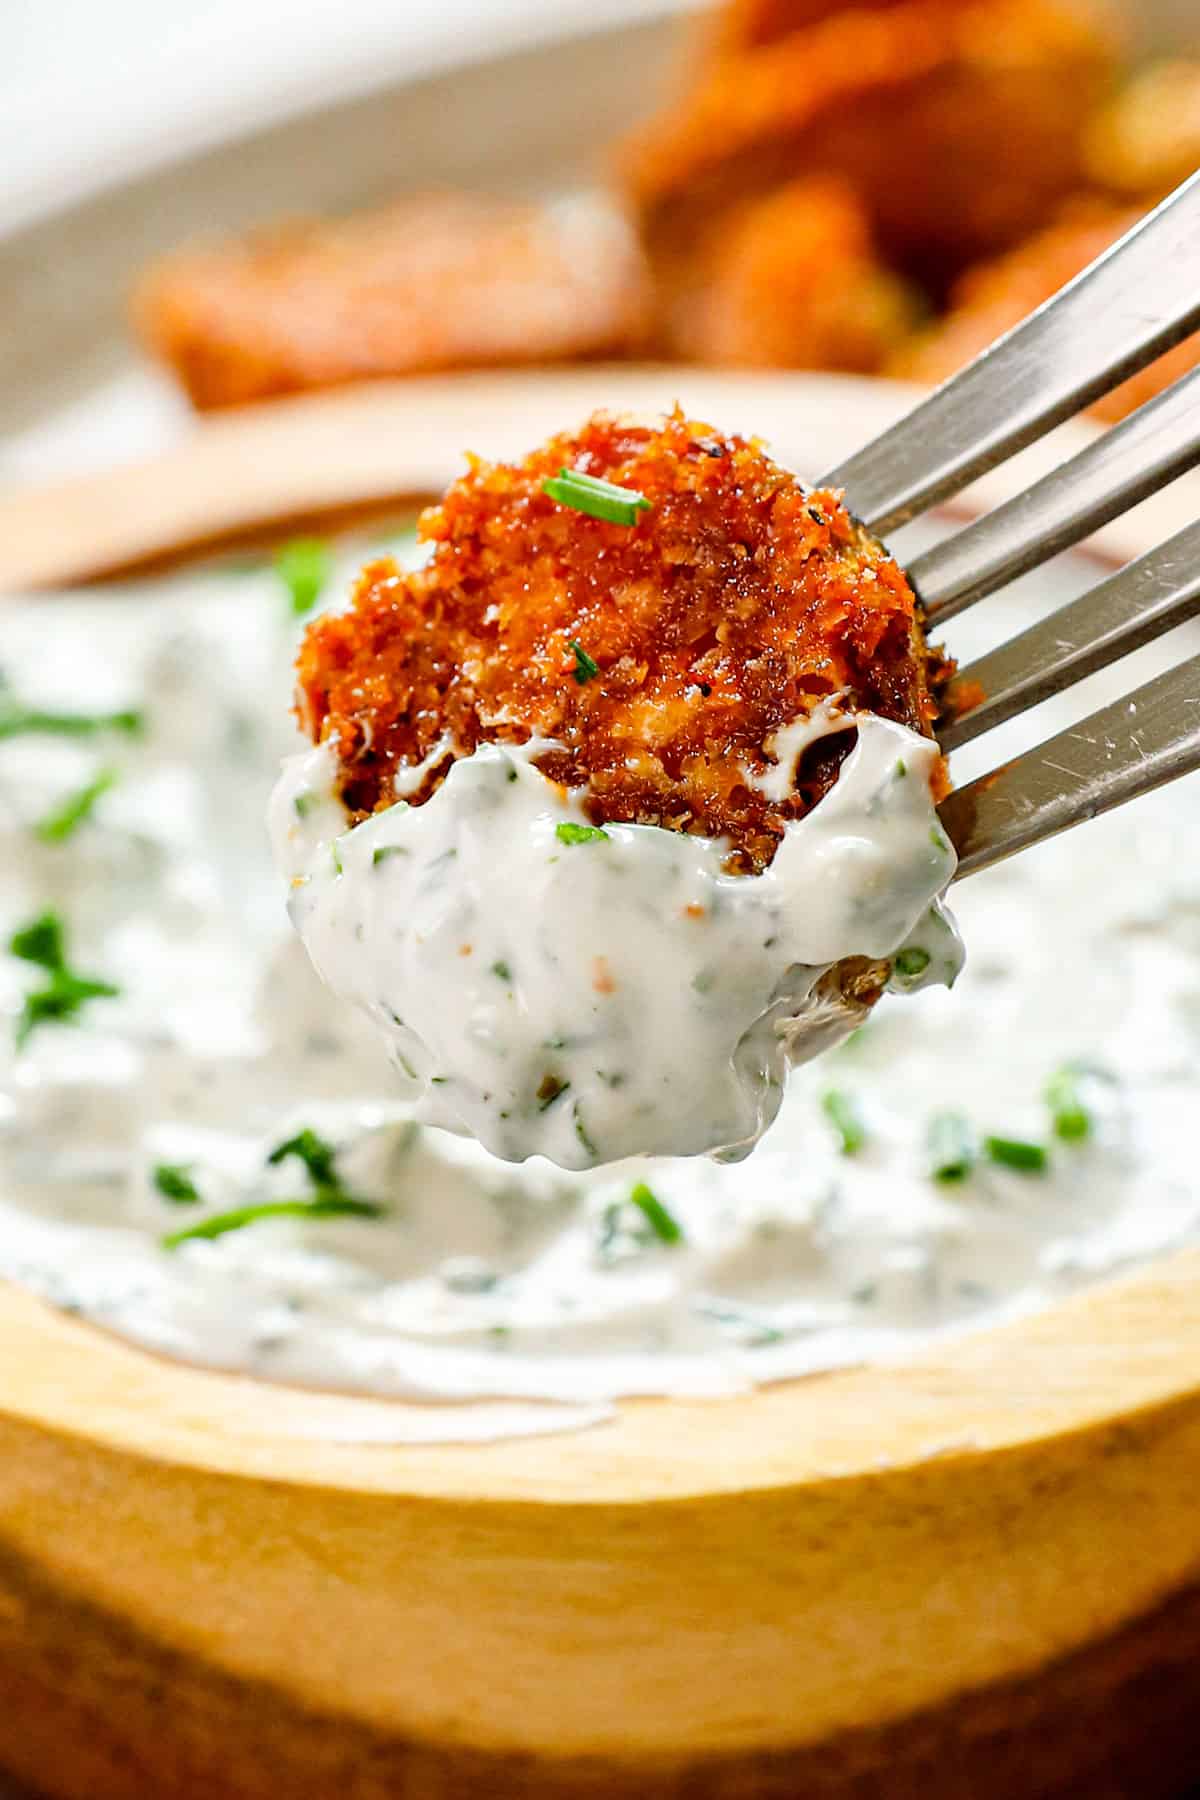 up closer of serving crispy Parmesan crusted potatoes by dipping in creamy herb sauce